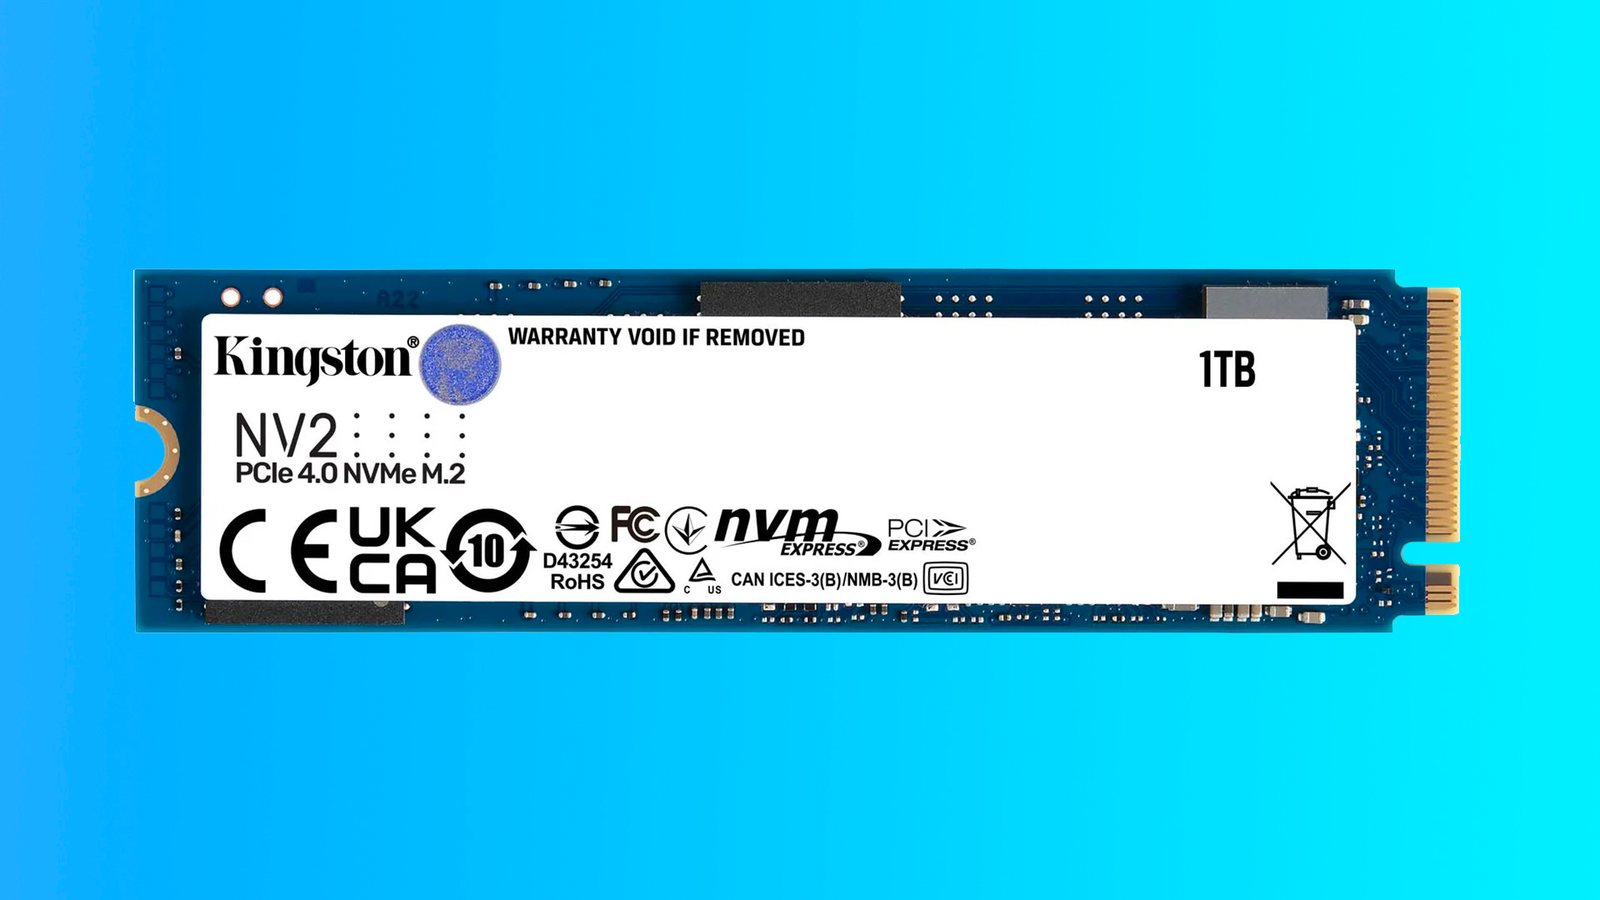 Get the Kingston NV2 1TB SSD for £48 from Wezzstar's  store with a code